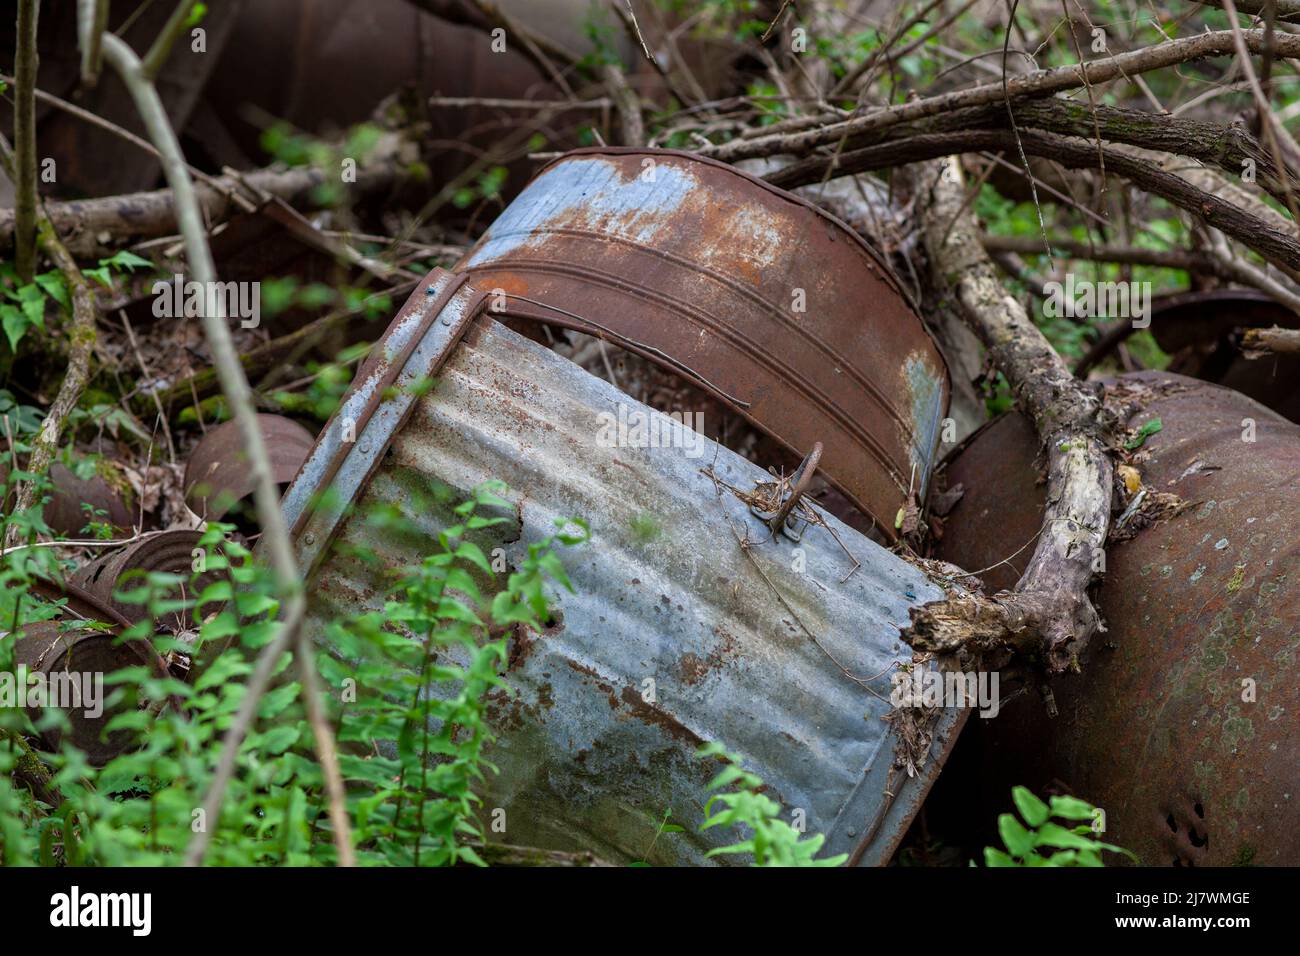 Rusty old tin cans and glass bottles decaying in at dump site in the forest. Stock Photo